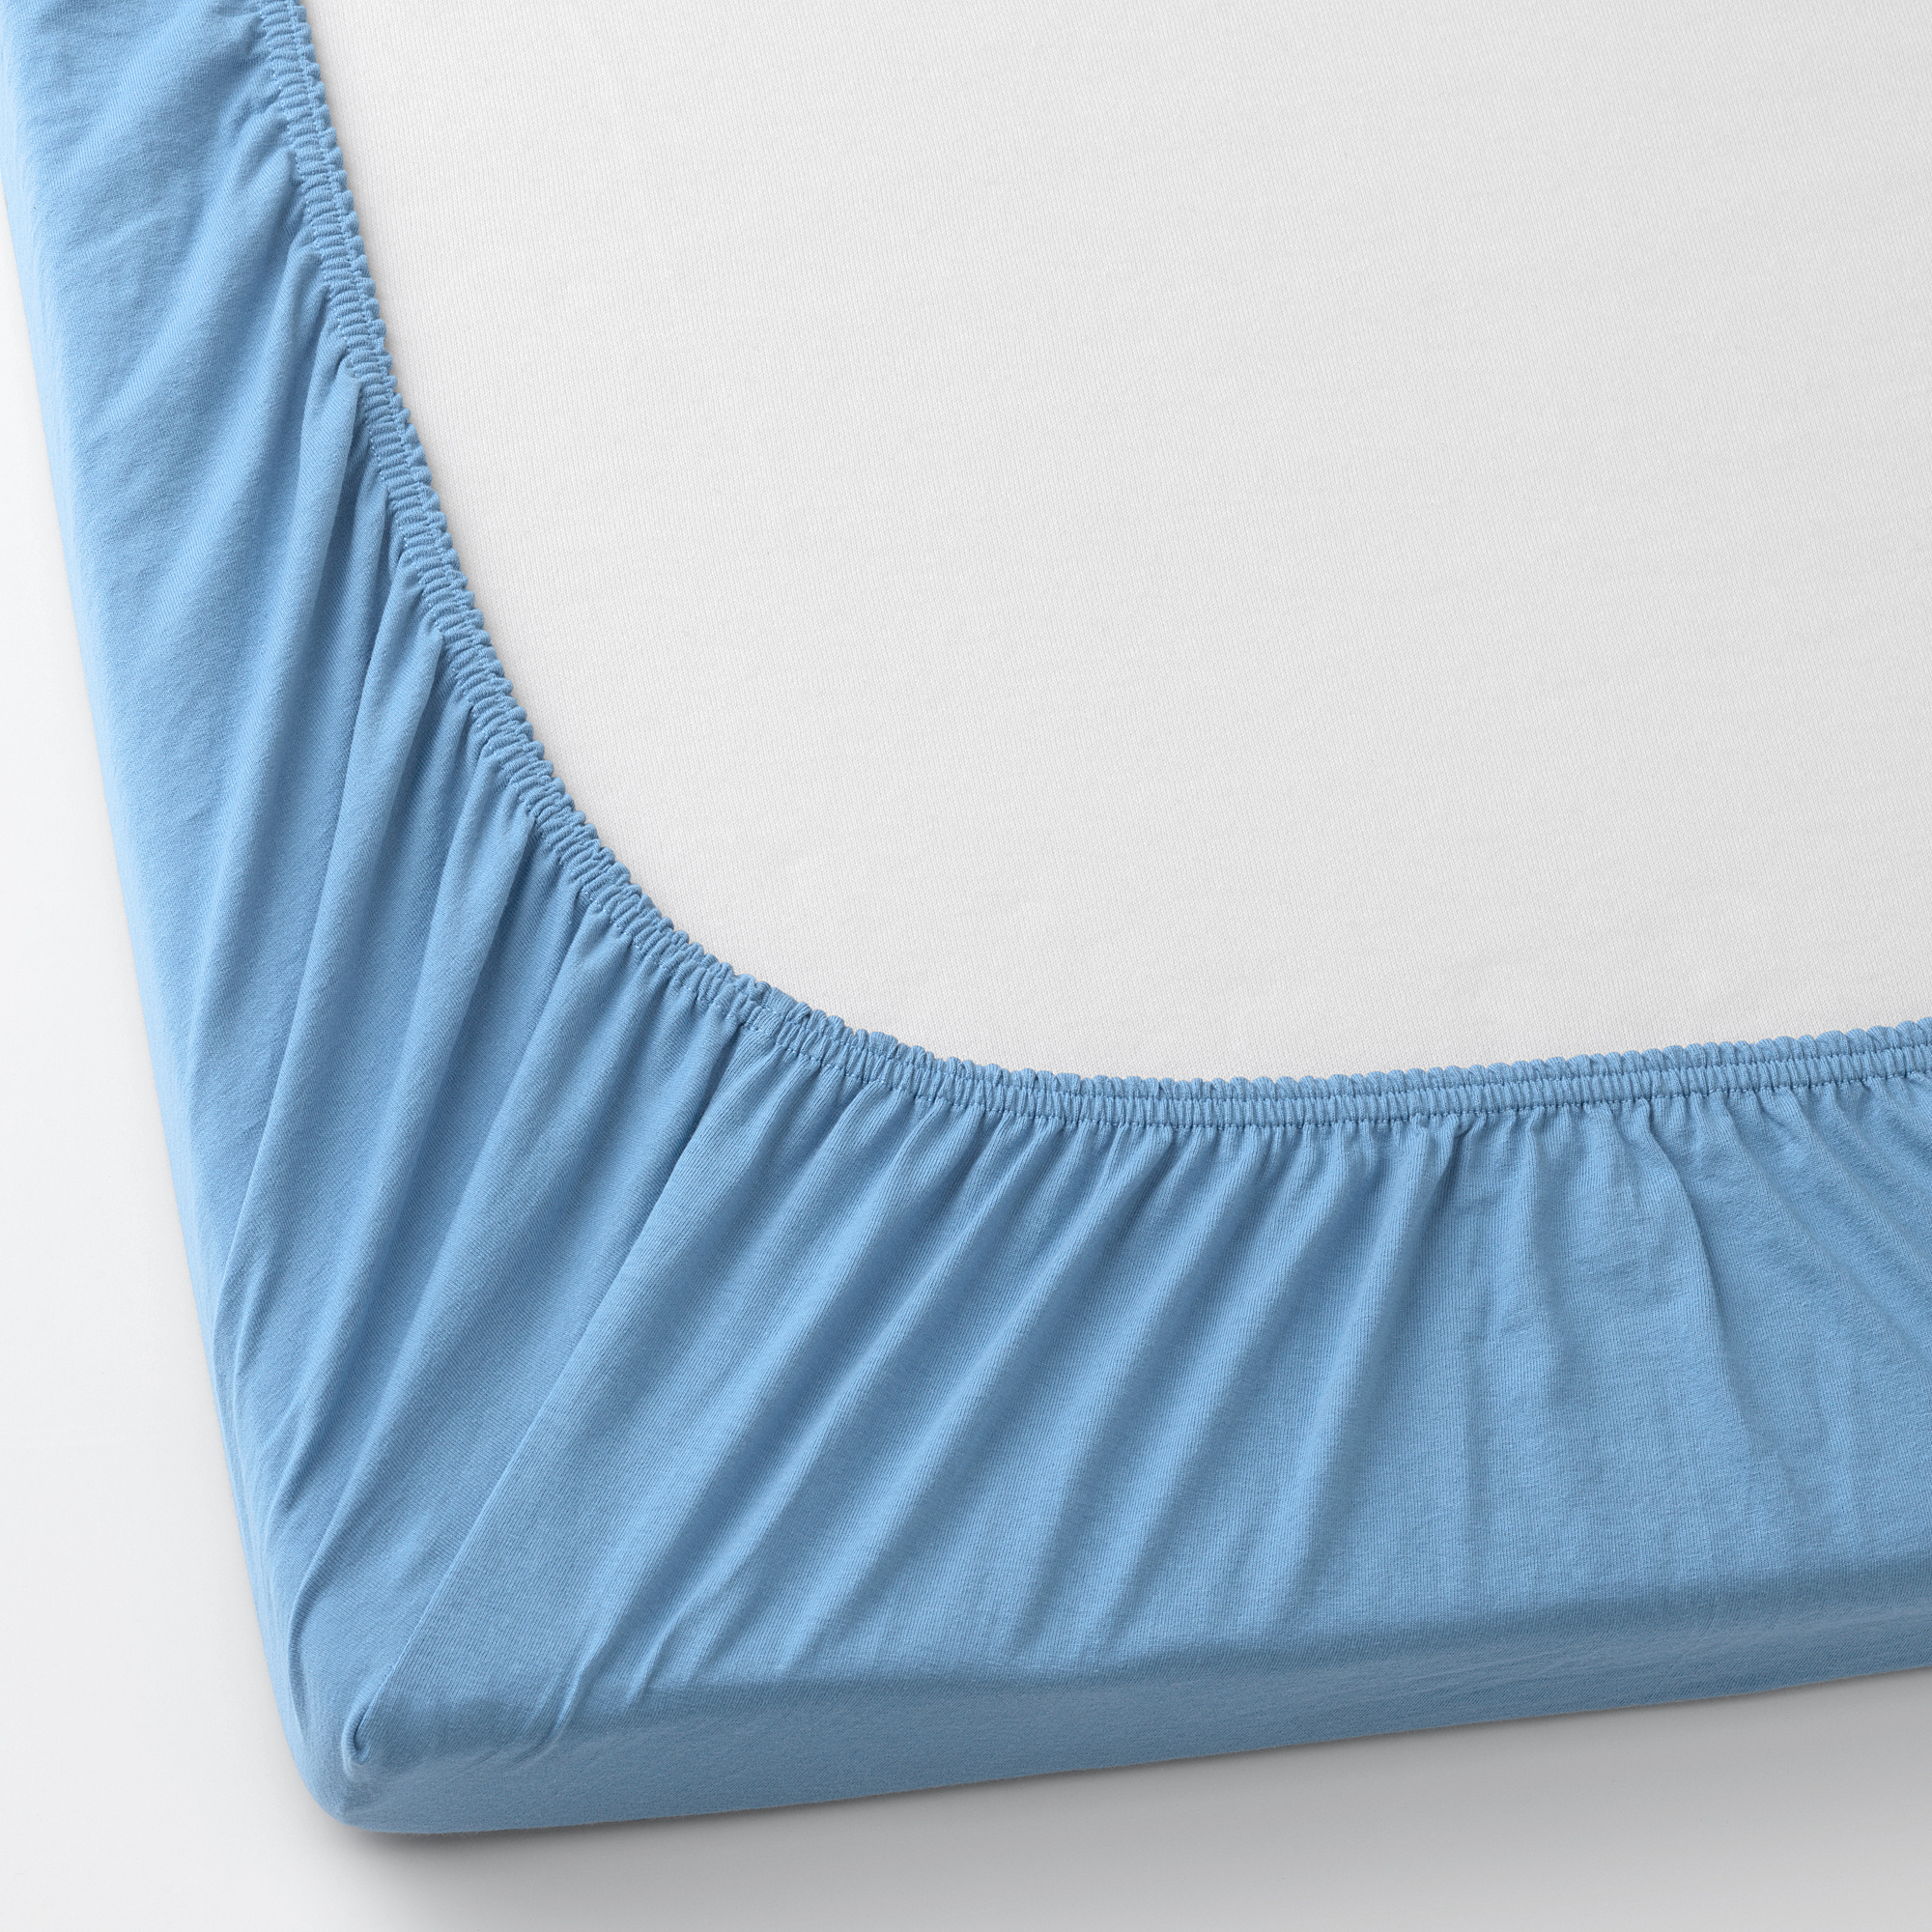 LEN fitted sheet for cot